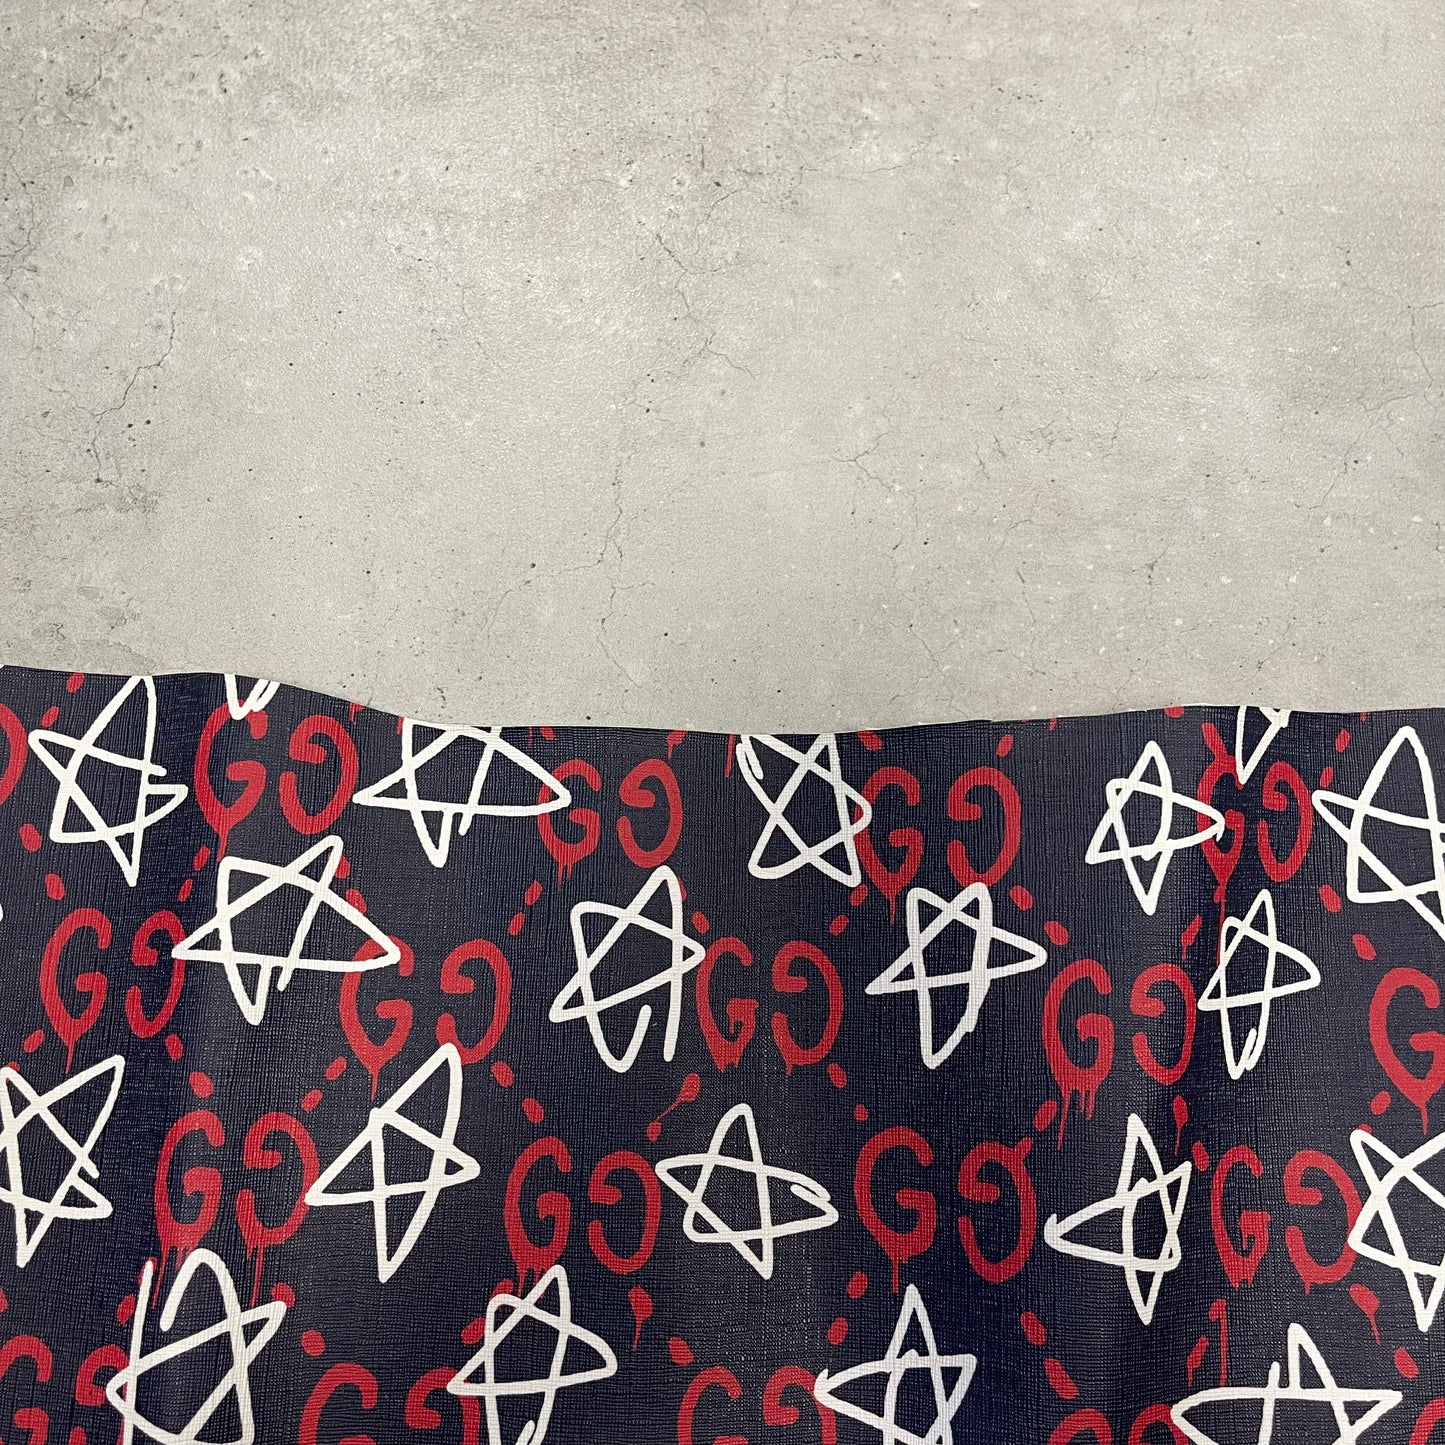 Double G drip/stars leather